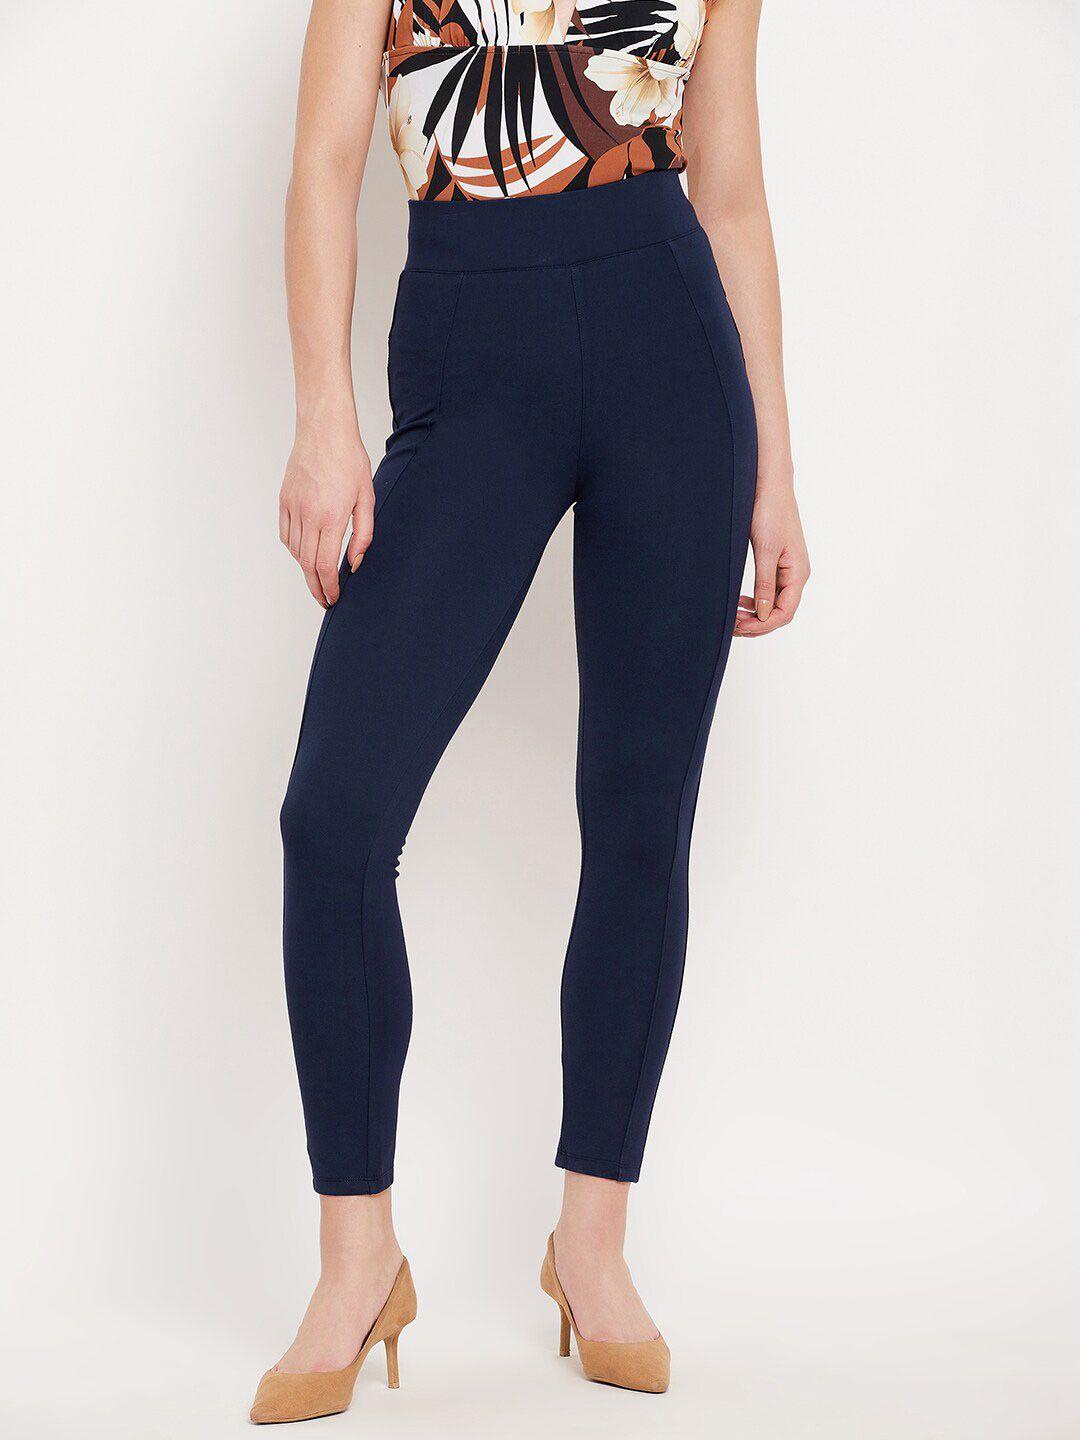 madame women navy blue solid jeggings